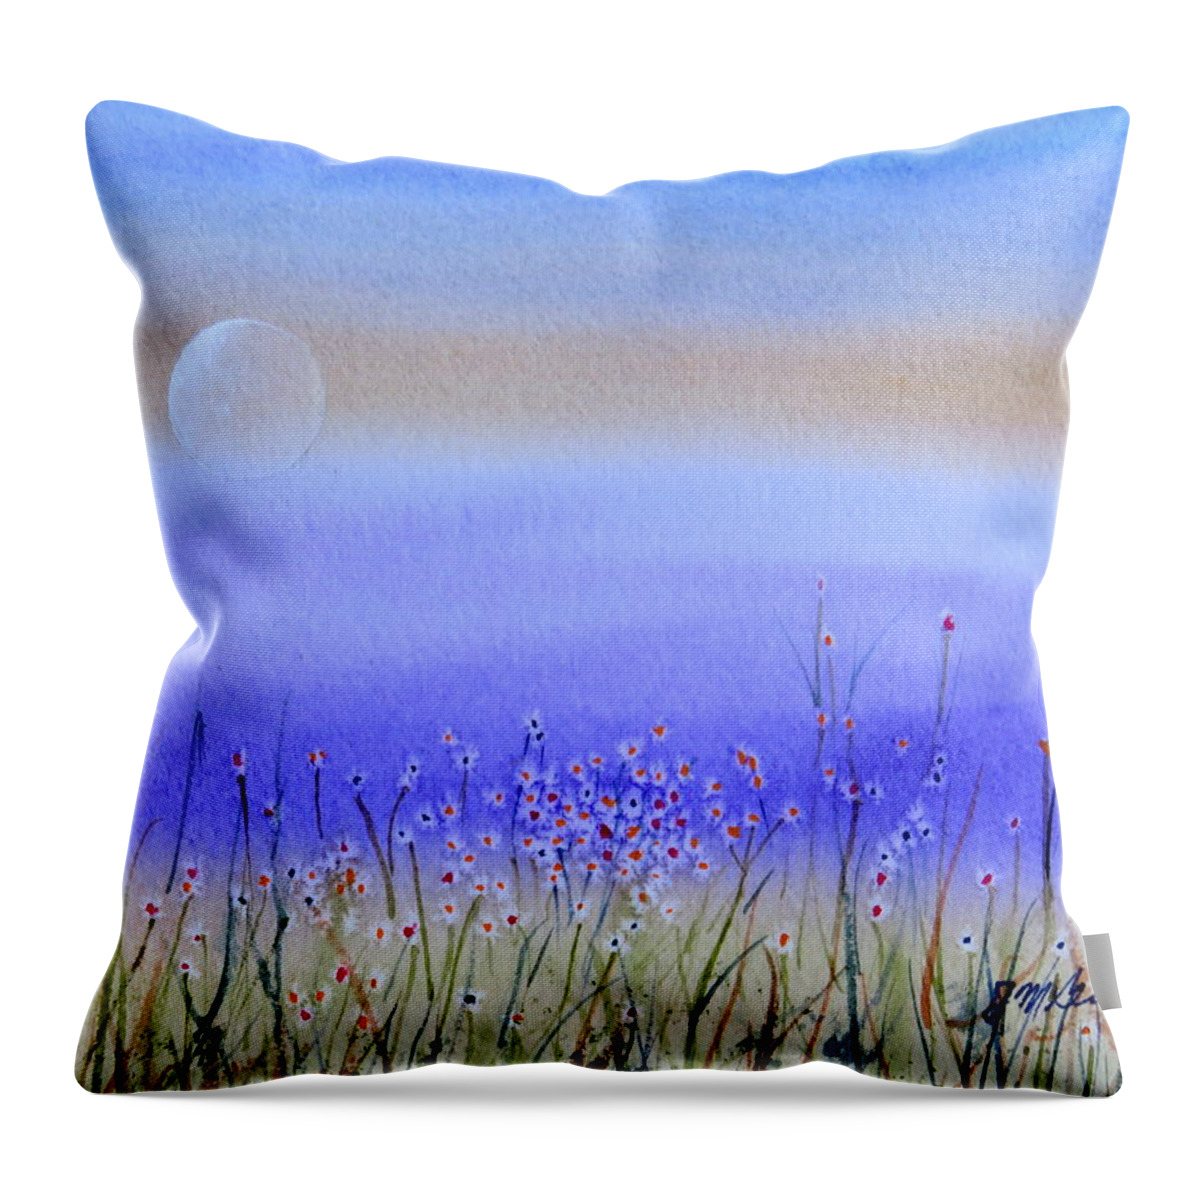 Daisies Throw Pillow featuring the painting Daisies Galore by Joseph Burger